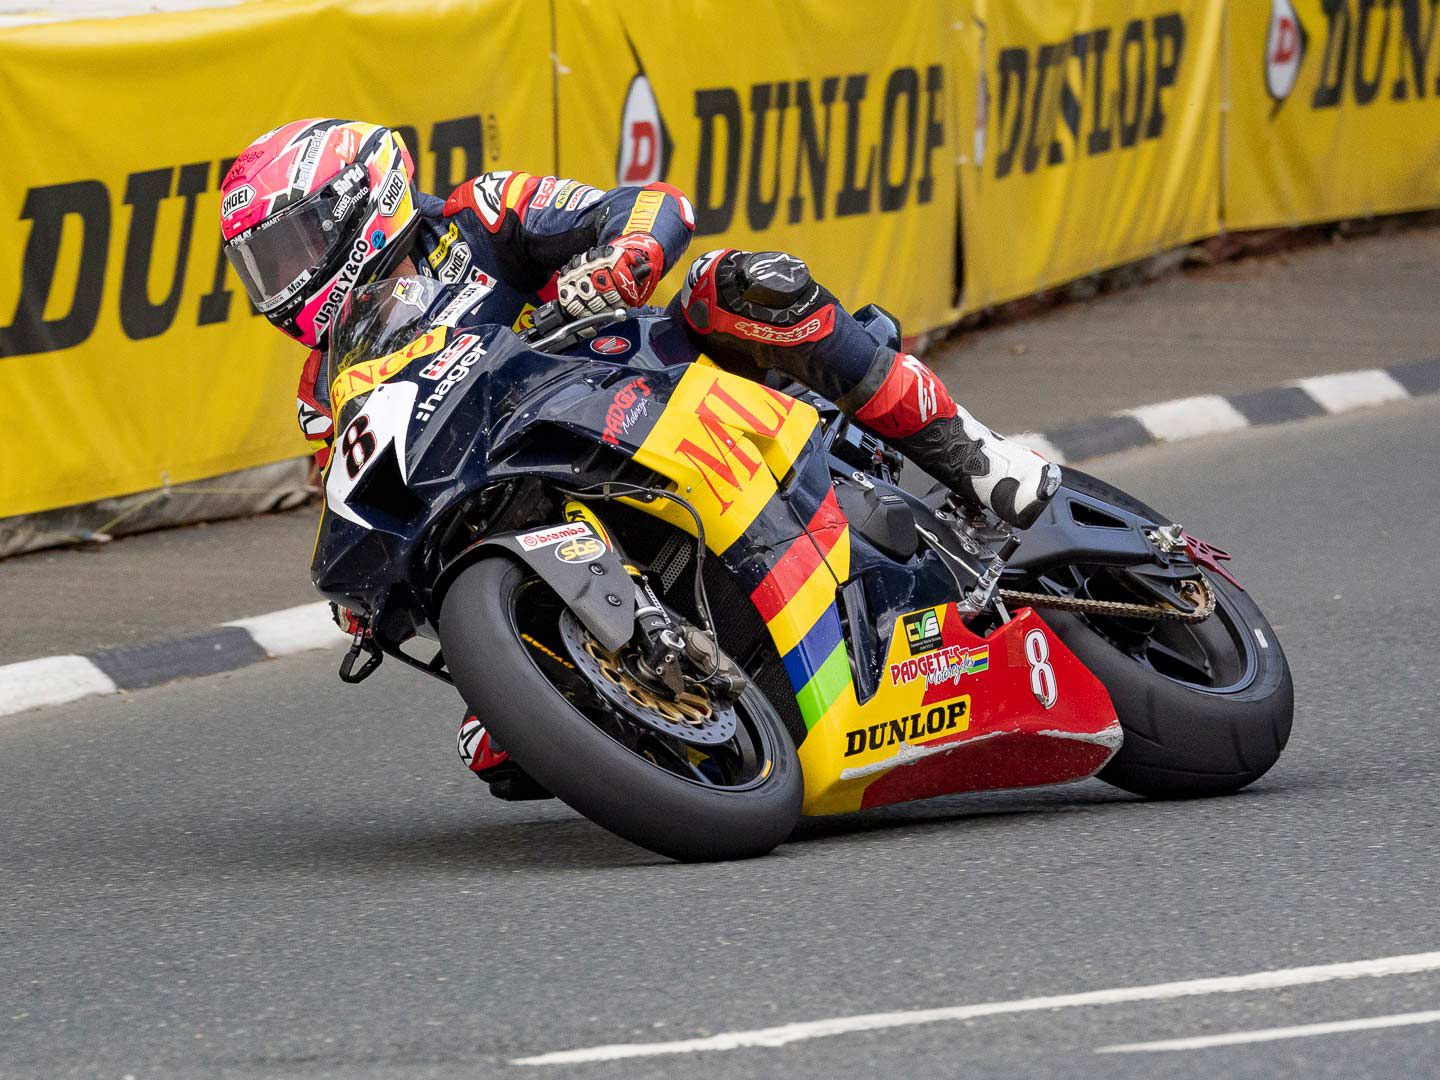 Expectations are high for Davey Todd on his Honda Fireblade RR-R. Todd has posted some of the top lap times during practice week, exceeding 132 mph.